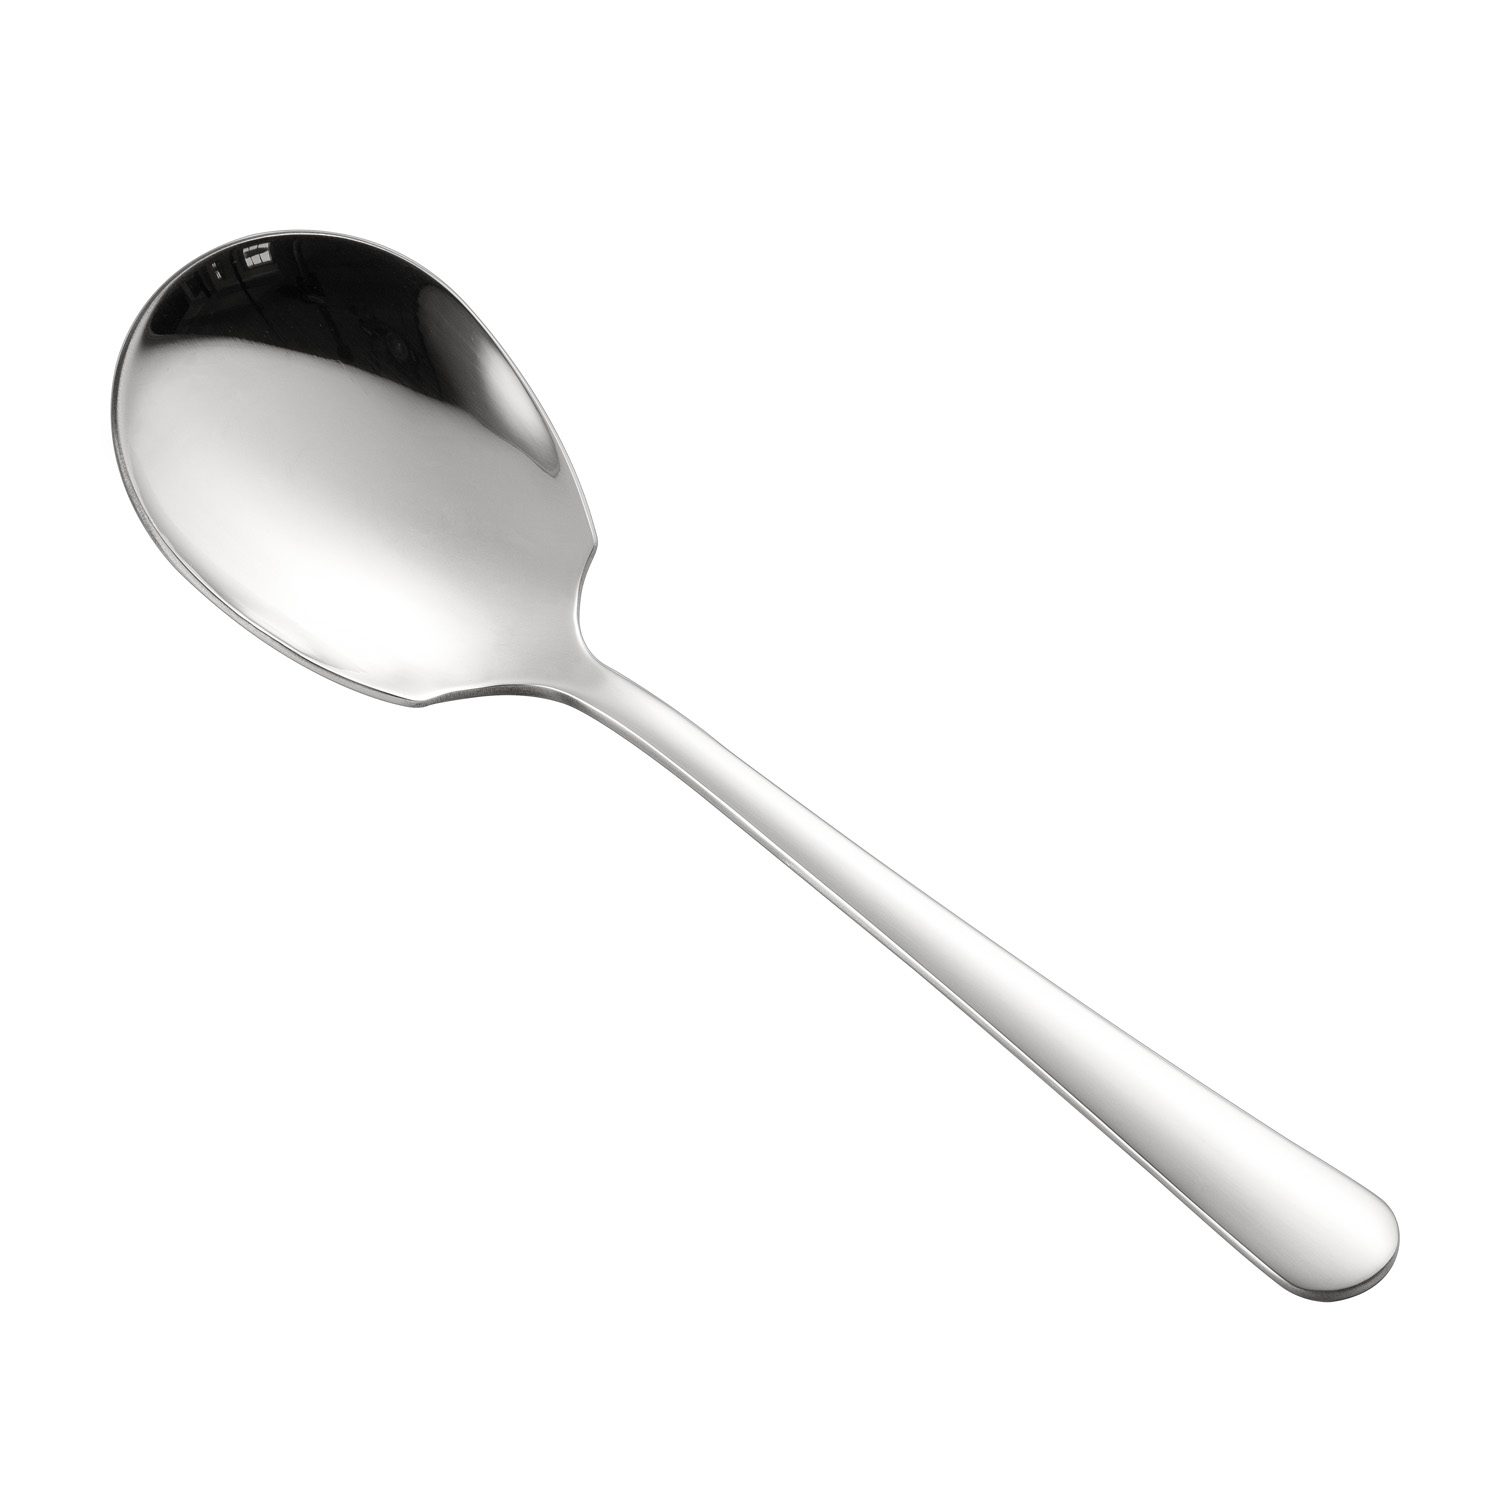 CAC China SSLS-8 Stainless Steel Serving Spoon with Round Edge 8-1/2" - 1 dozen